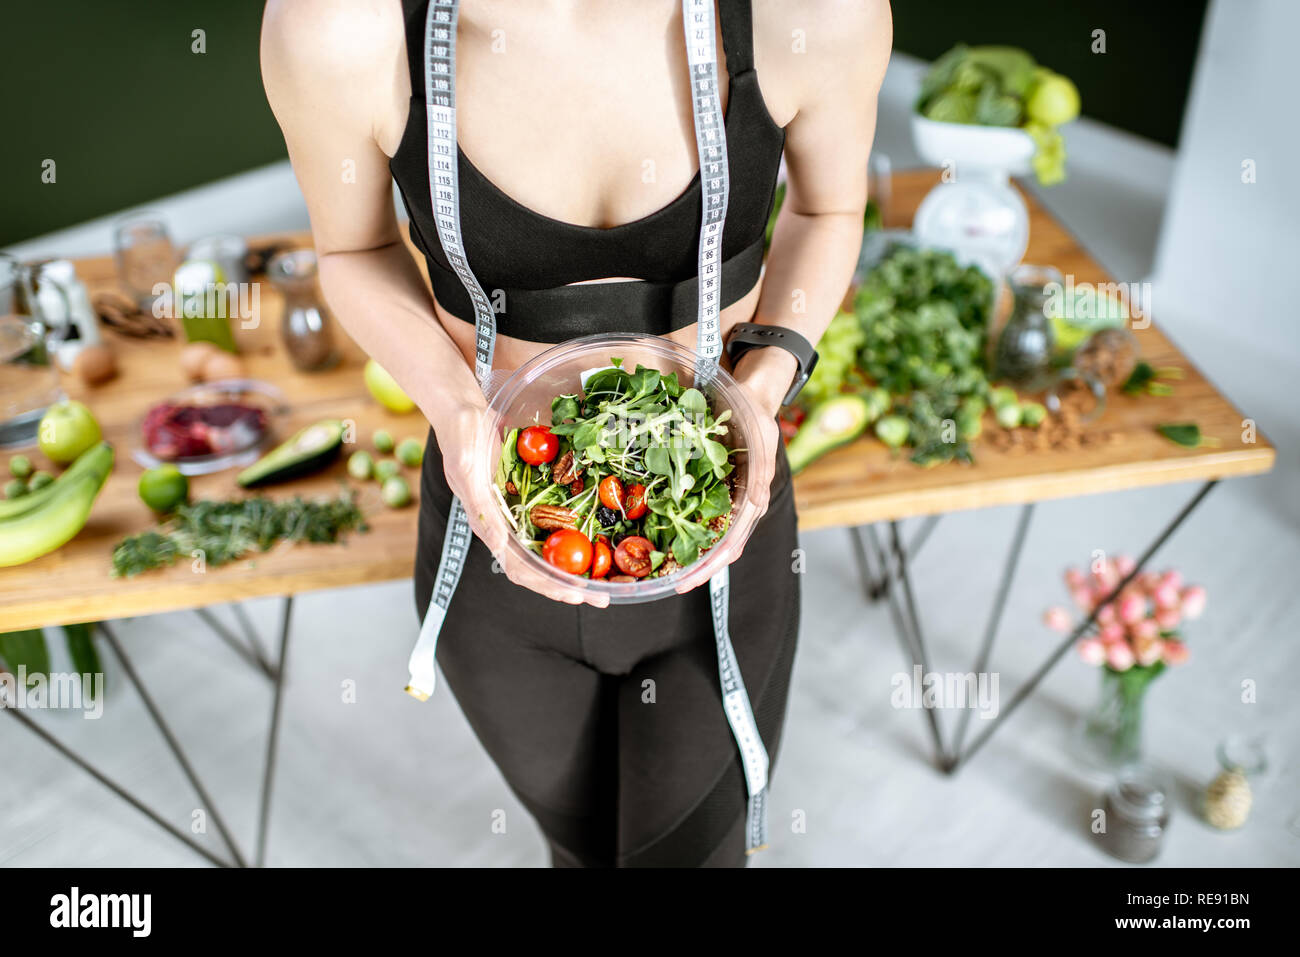 Athletic woman in sportswear holding salad near the table full of healthy products. Healthy eating and sports lifestyle concept Stock Photo